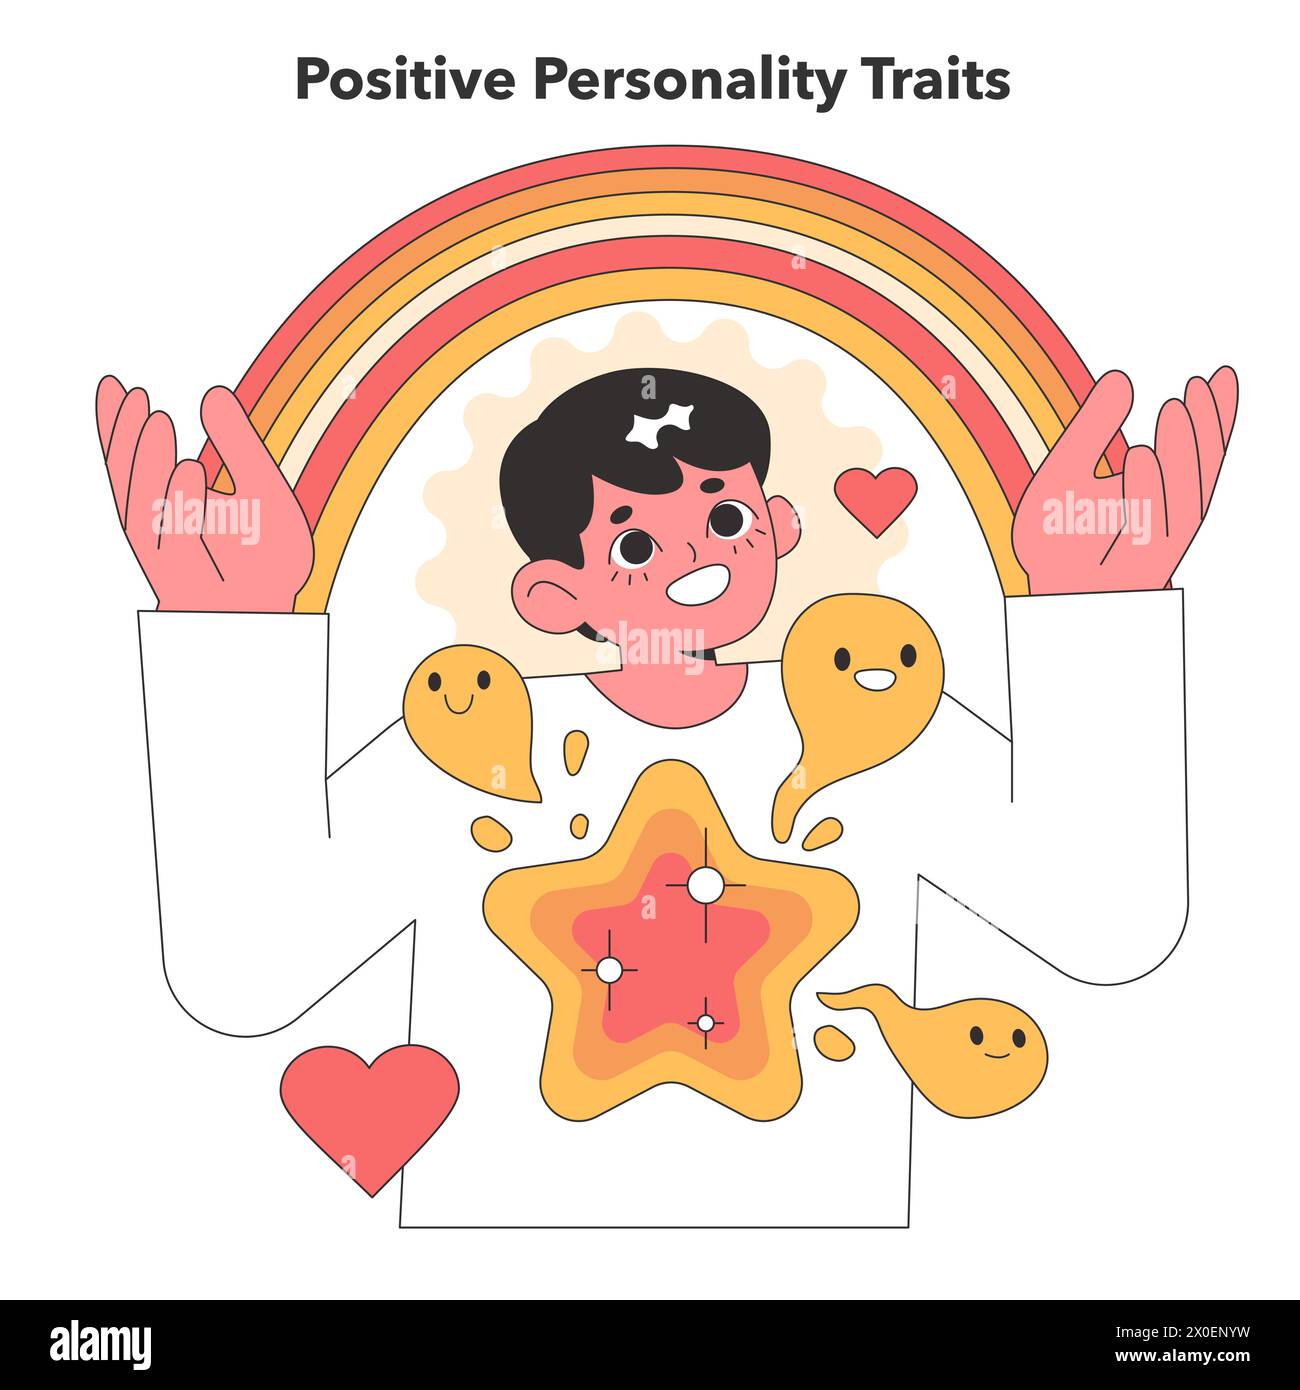 Delightful vector illustration of a character radiating positive personality traits, enveloped by a vibrant rainbow and joyful emoticons, symbolizing optimism Stock Vector